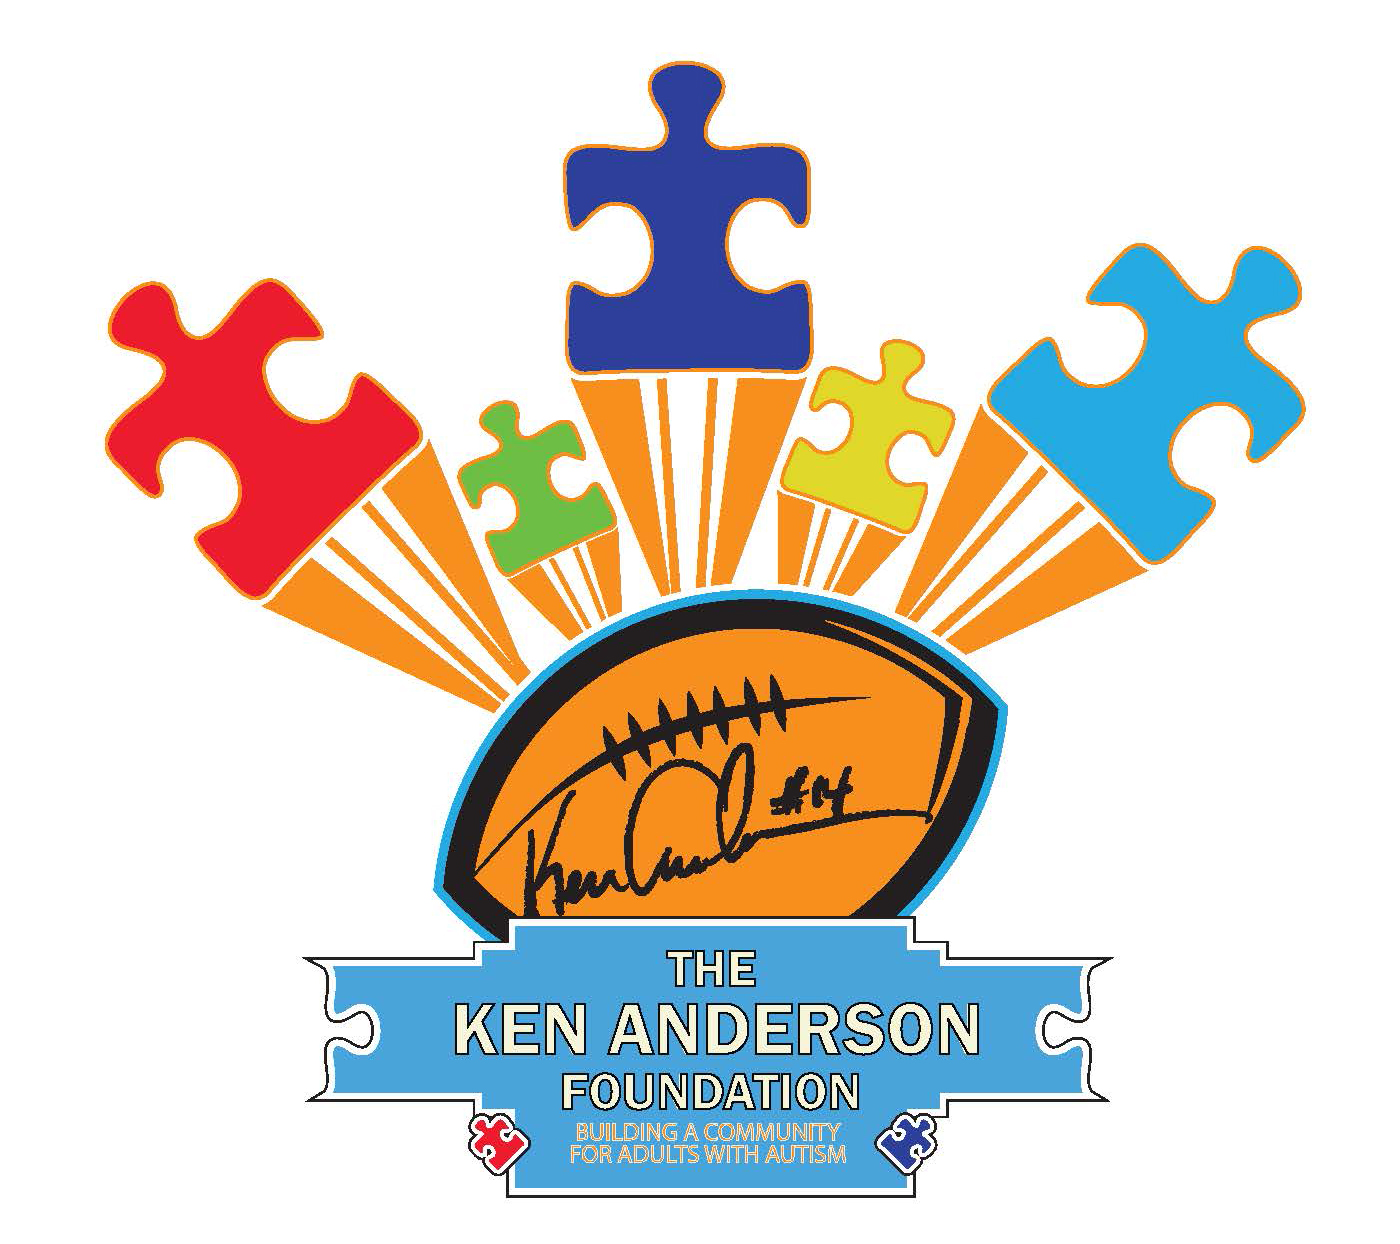 Flottman Supports the Kenny Anderson Autism Foundation